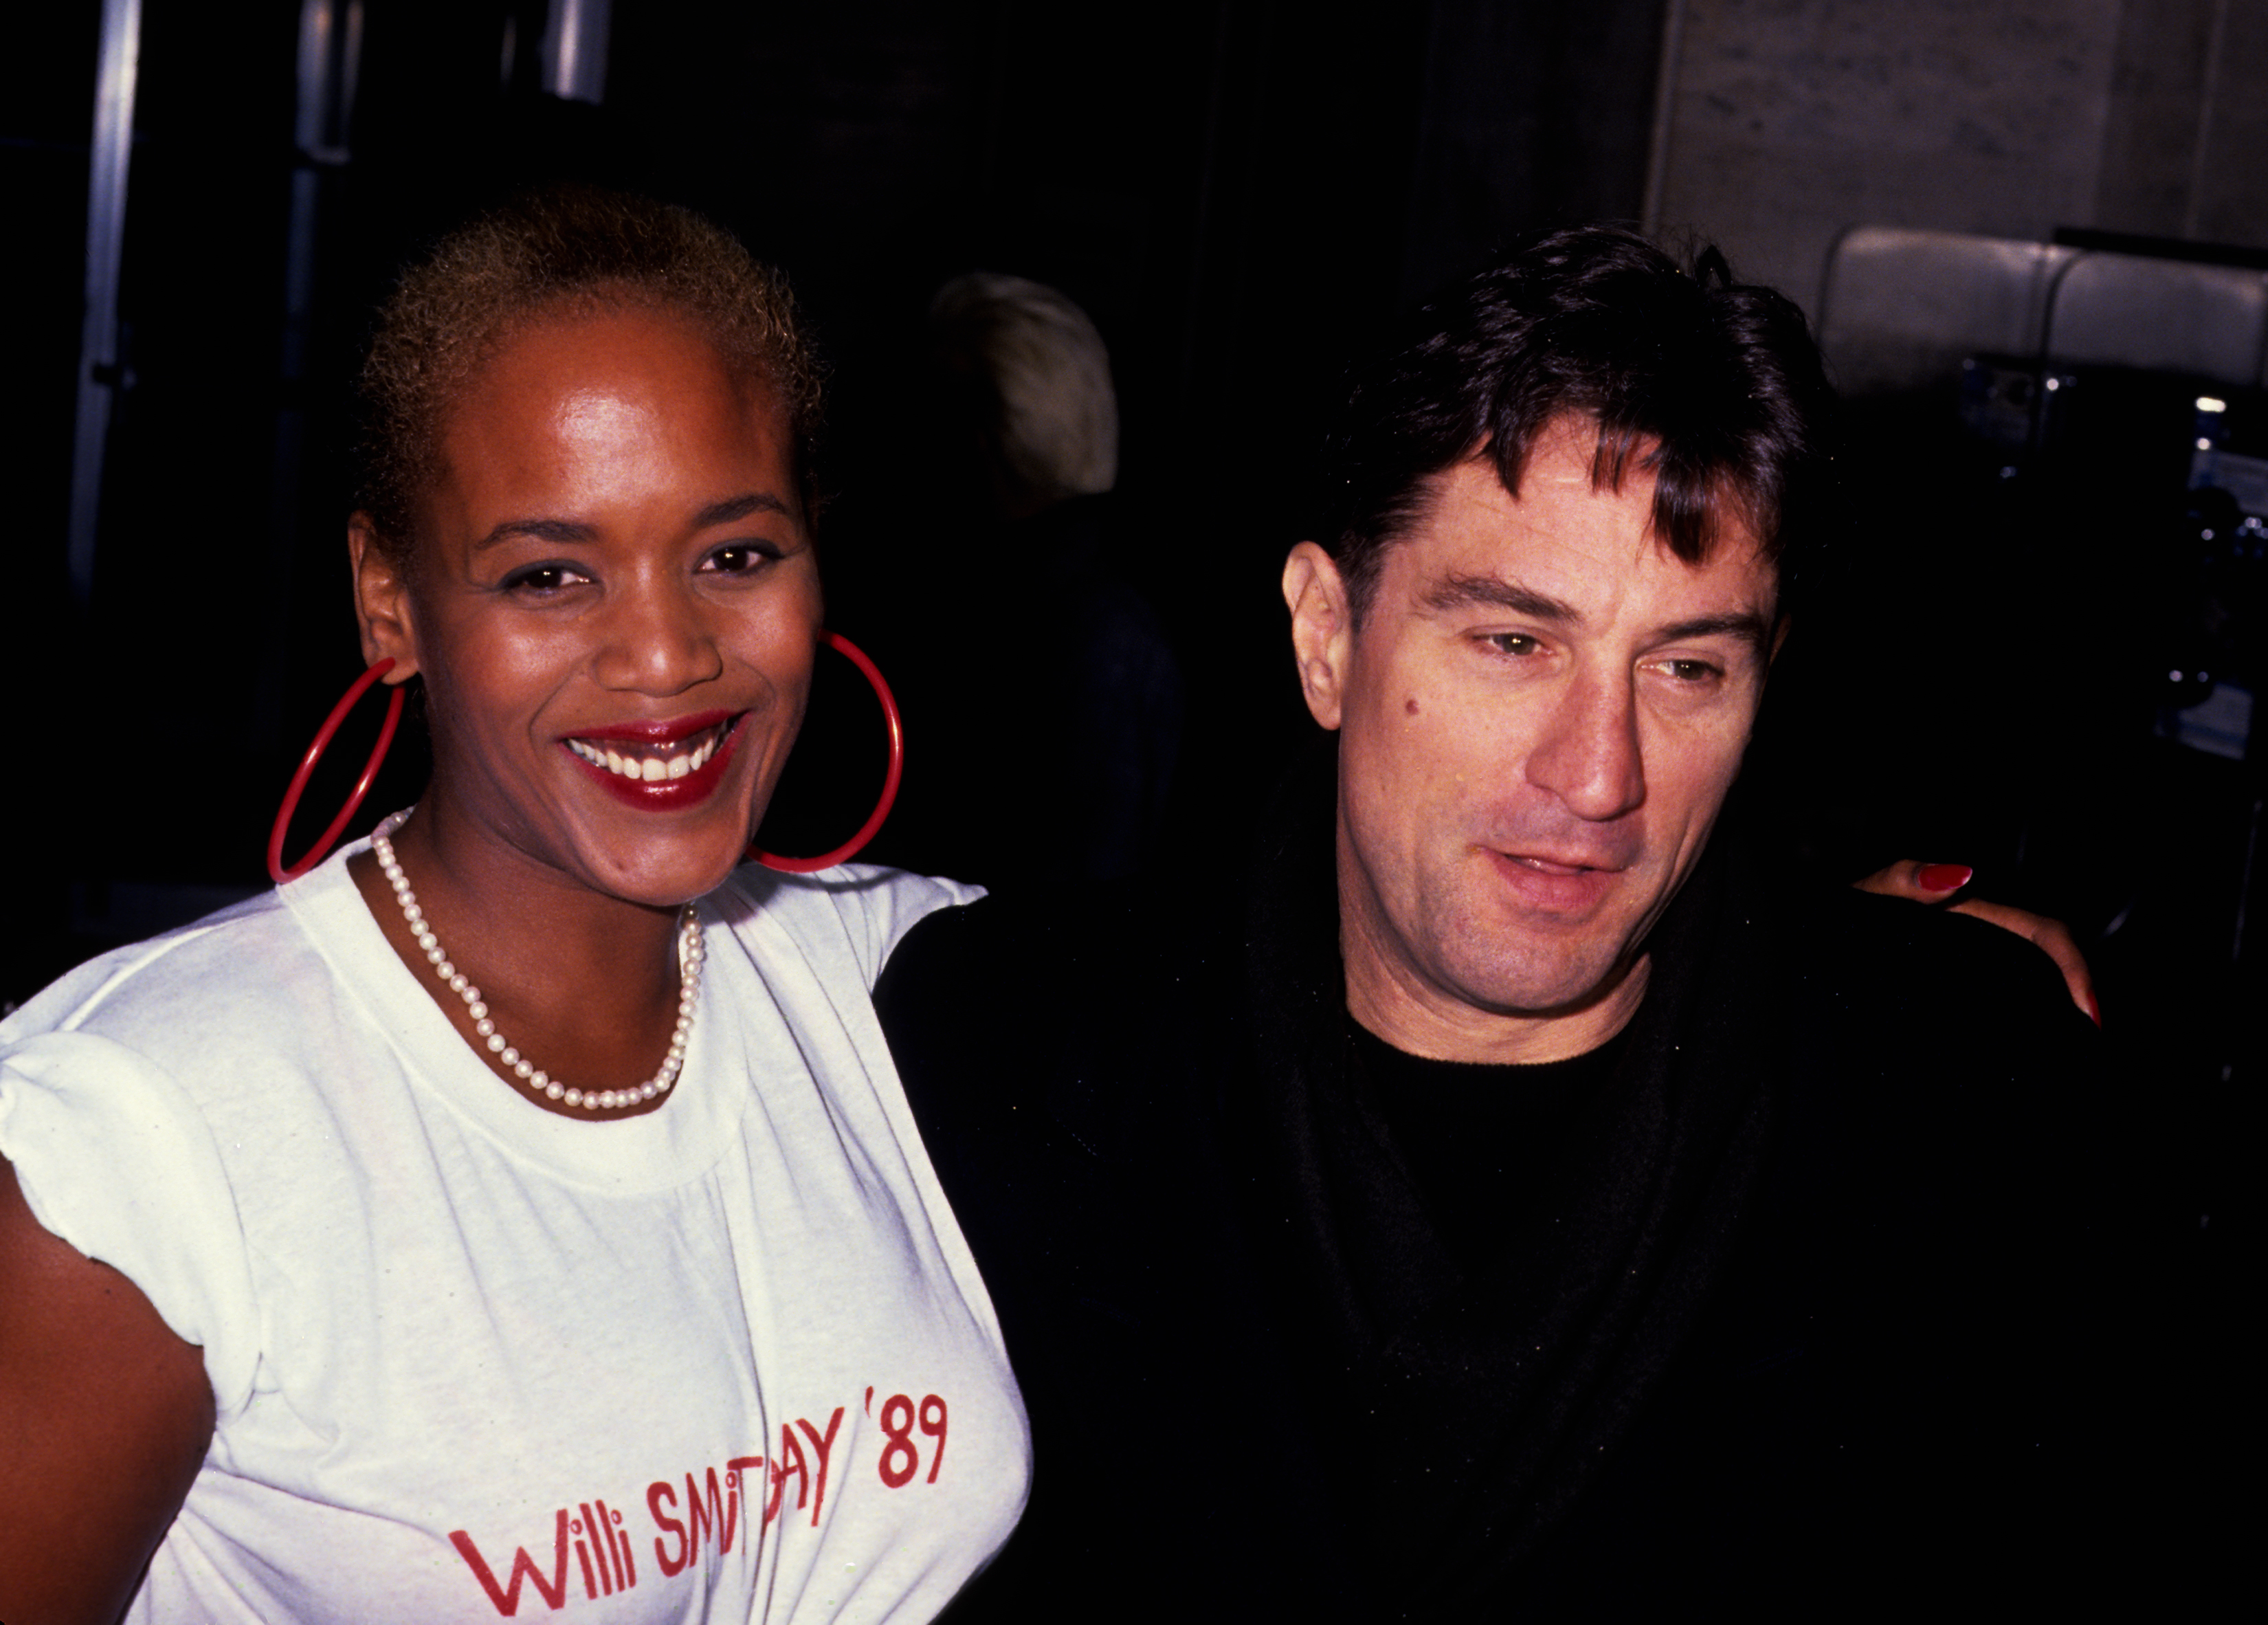 Toukie Smith in a graphic tee and De Niro in a dark jacket, both smiling